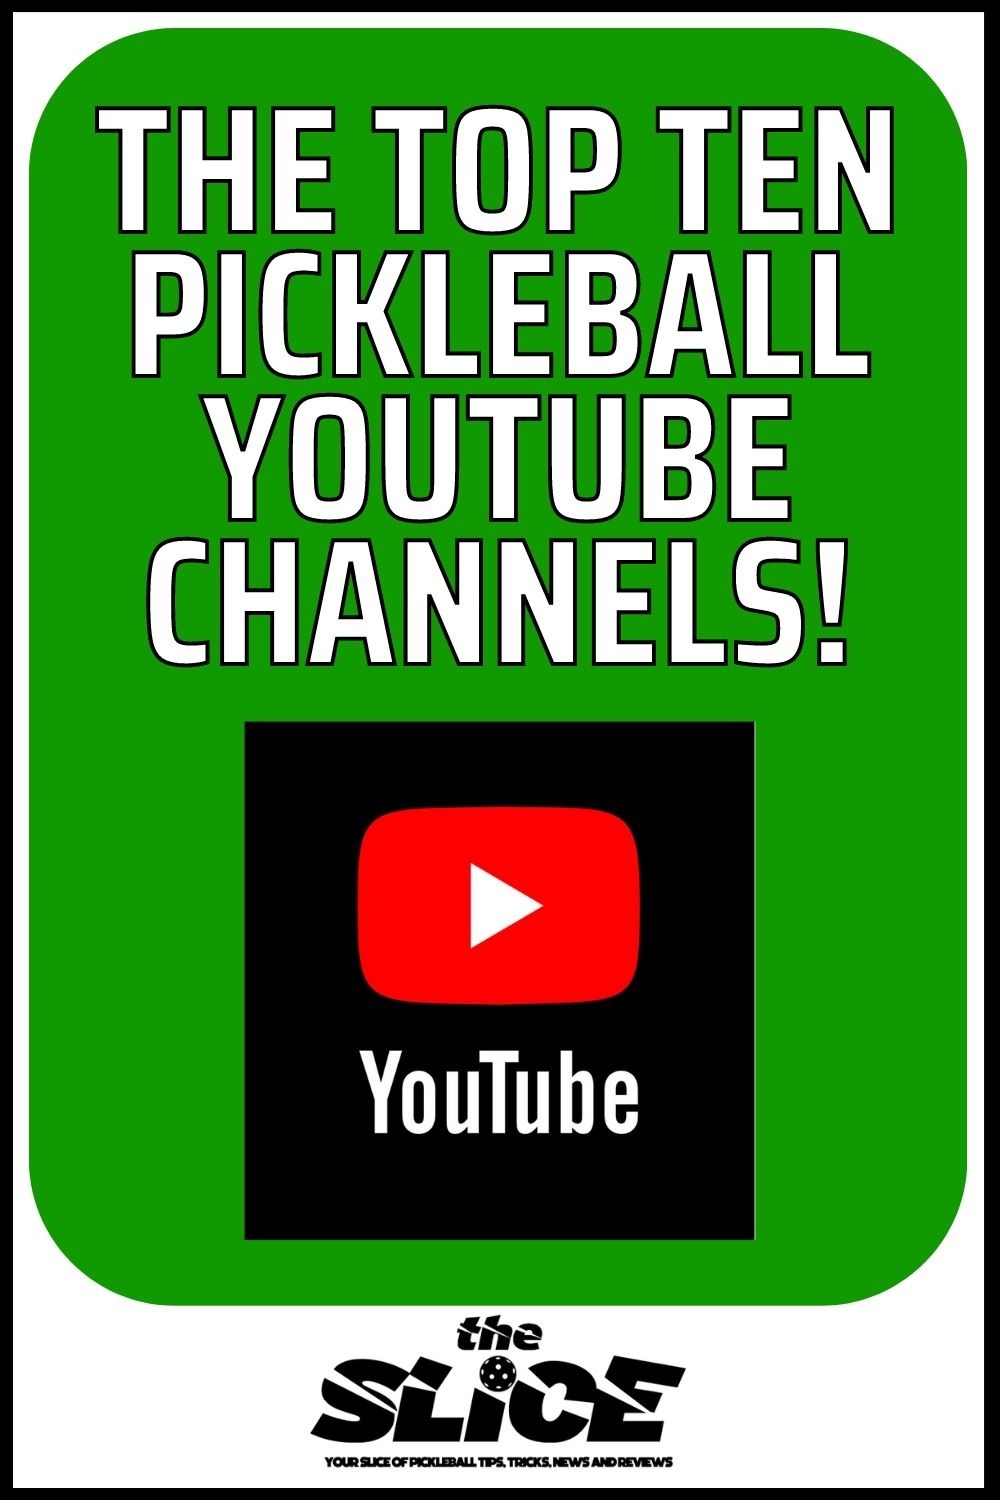 The Top Ten Pickleball YouTube Channels!